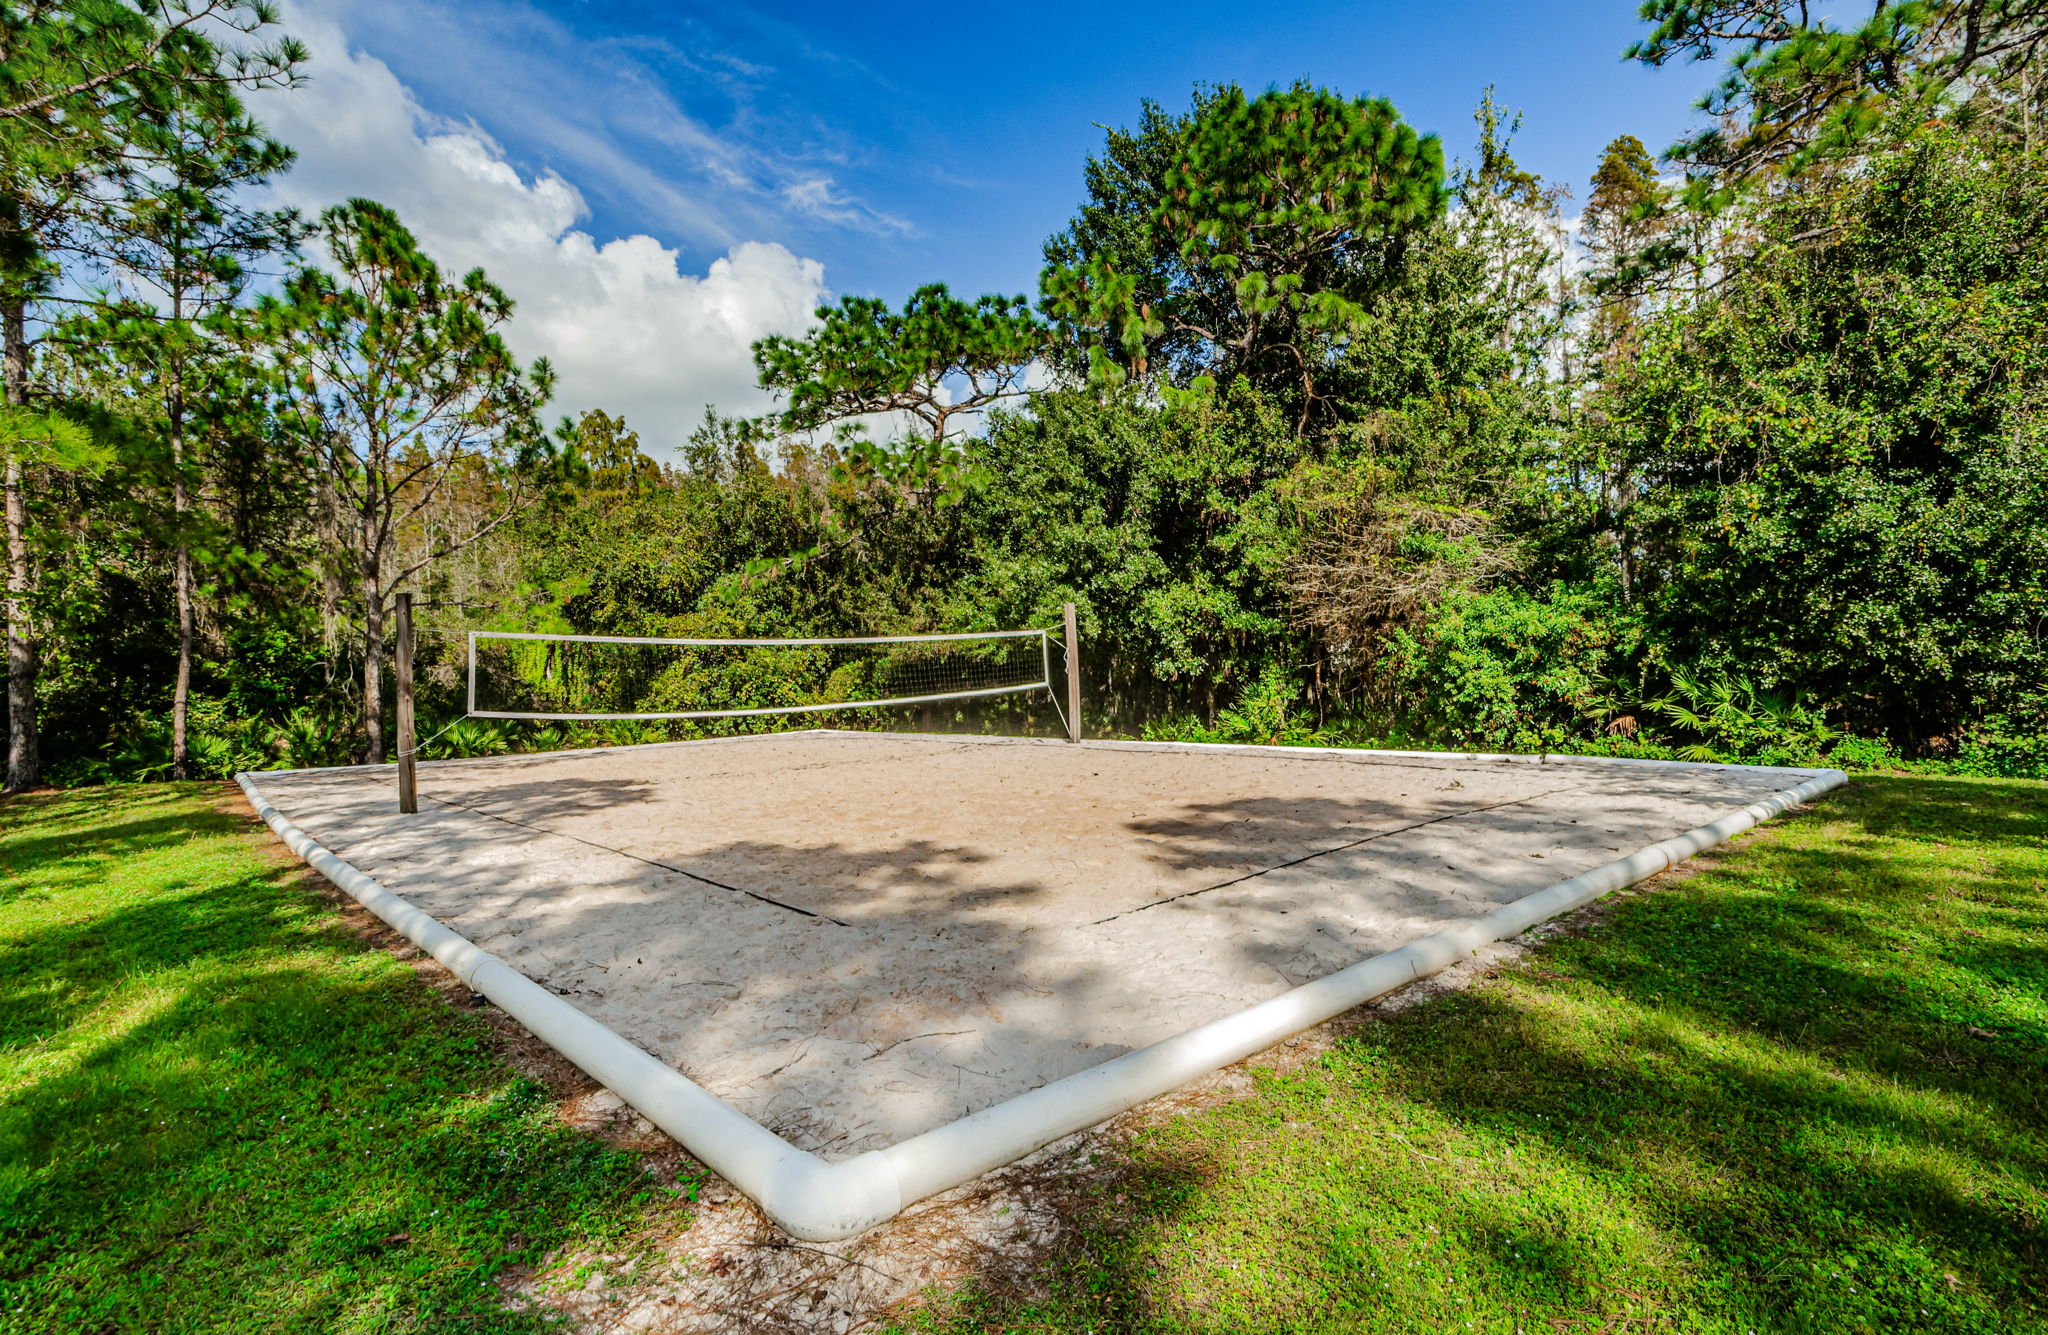 Volley Ball Court 1A